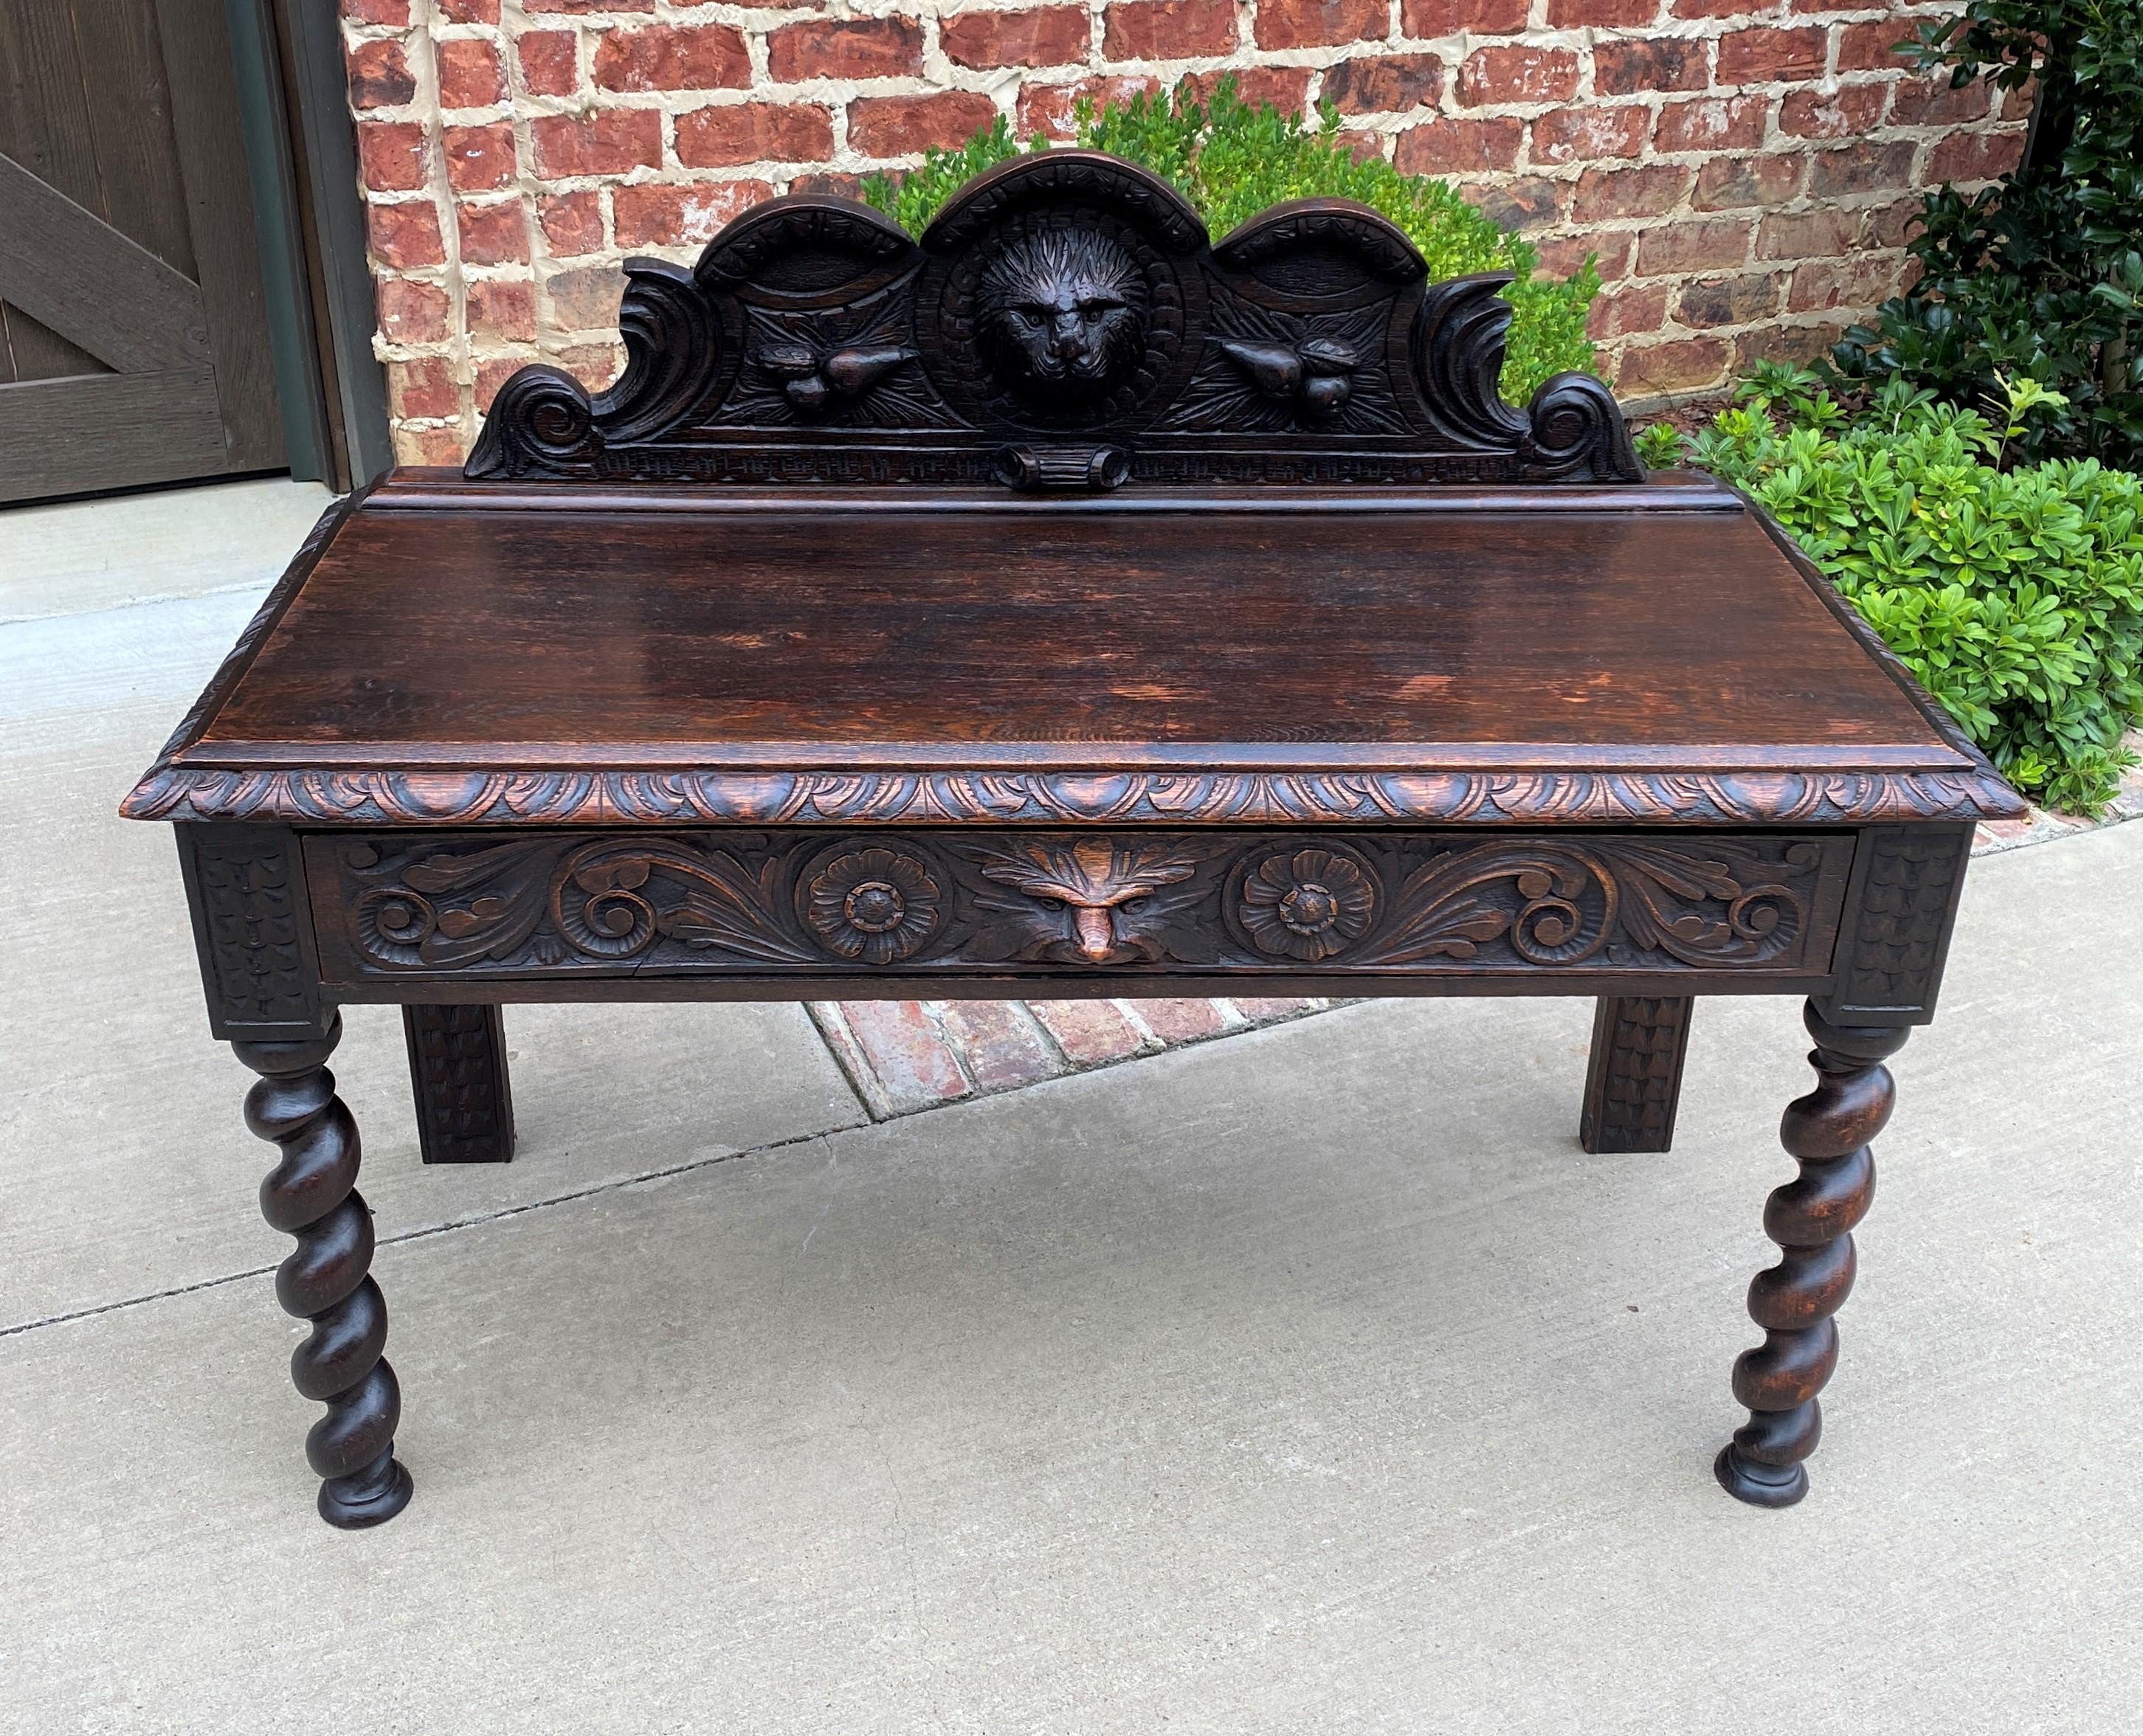 Charming antique English oak window seat or end-of-bed bench~~Gothic revival~~one drawer ~~c. 1900

Classic British flair decorator piece~~highly carved crown with gothic elements and barley twist legs~~one wide drawer for storage with carved mask